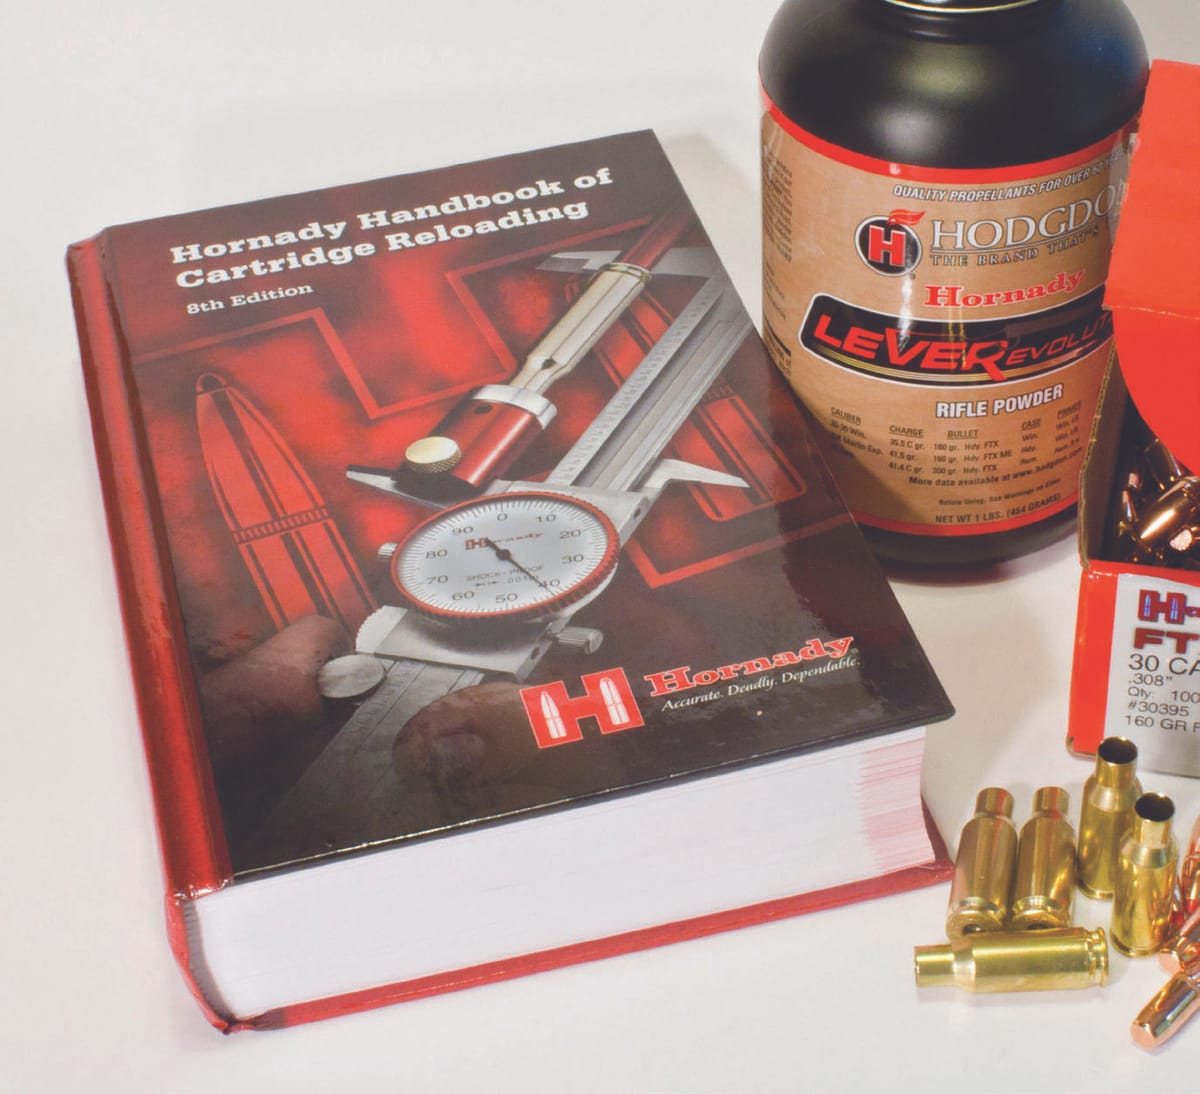 A Hornady manual with a pound of rifle powder and unprimed .308 brass and bullets.